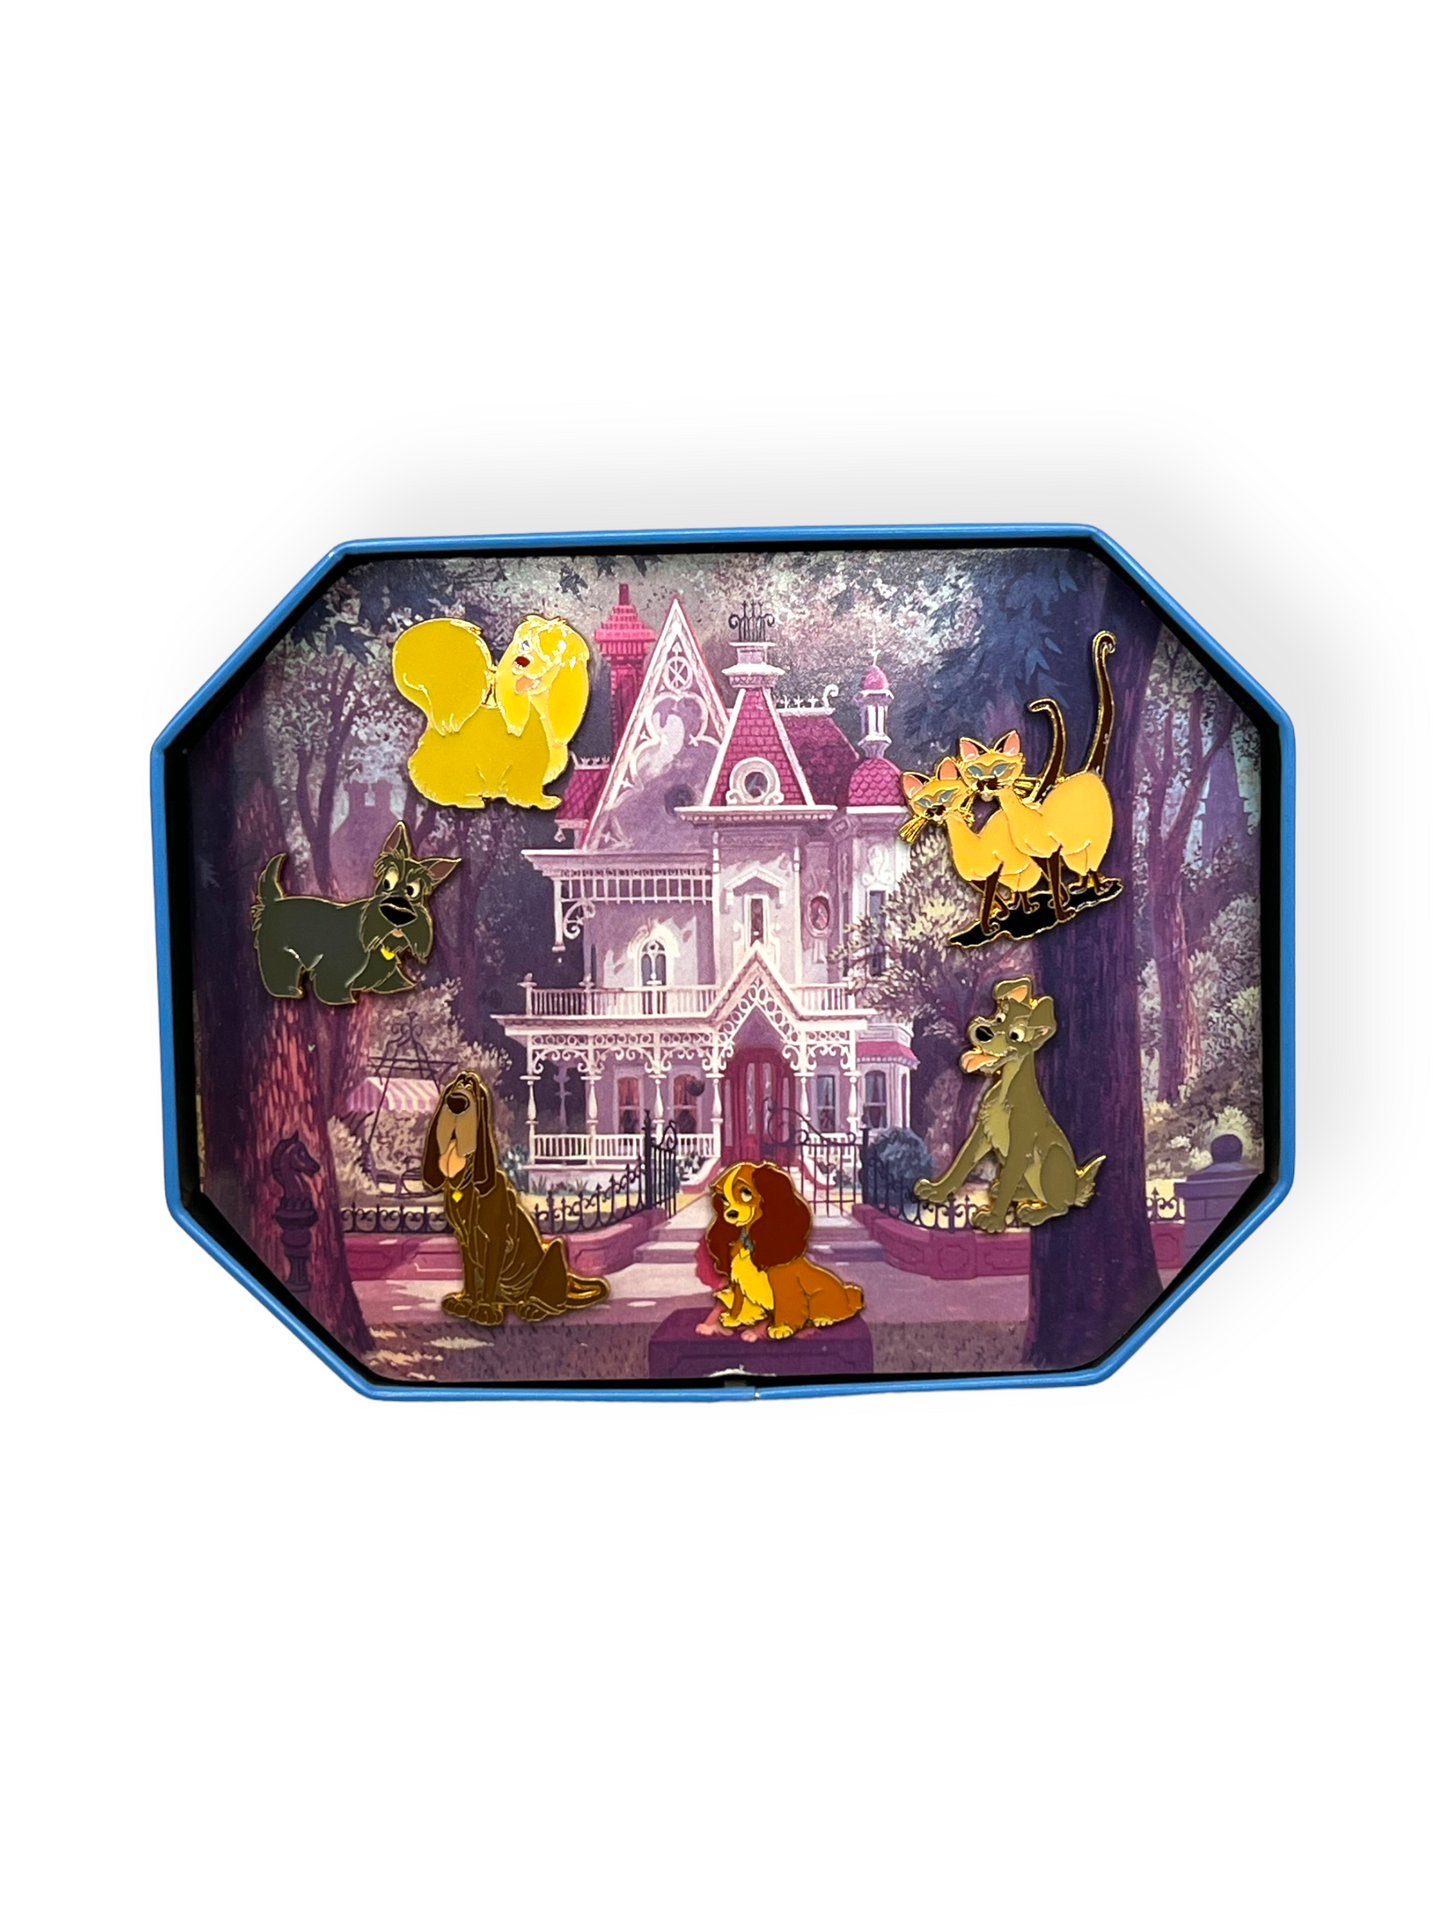 Lady And The Tramp Commemorative Tin Set